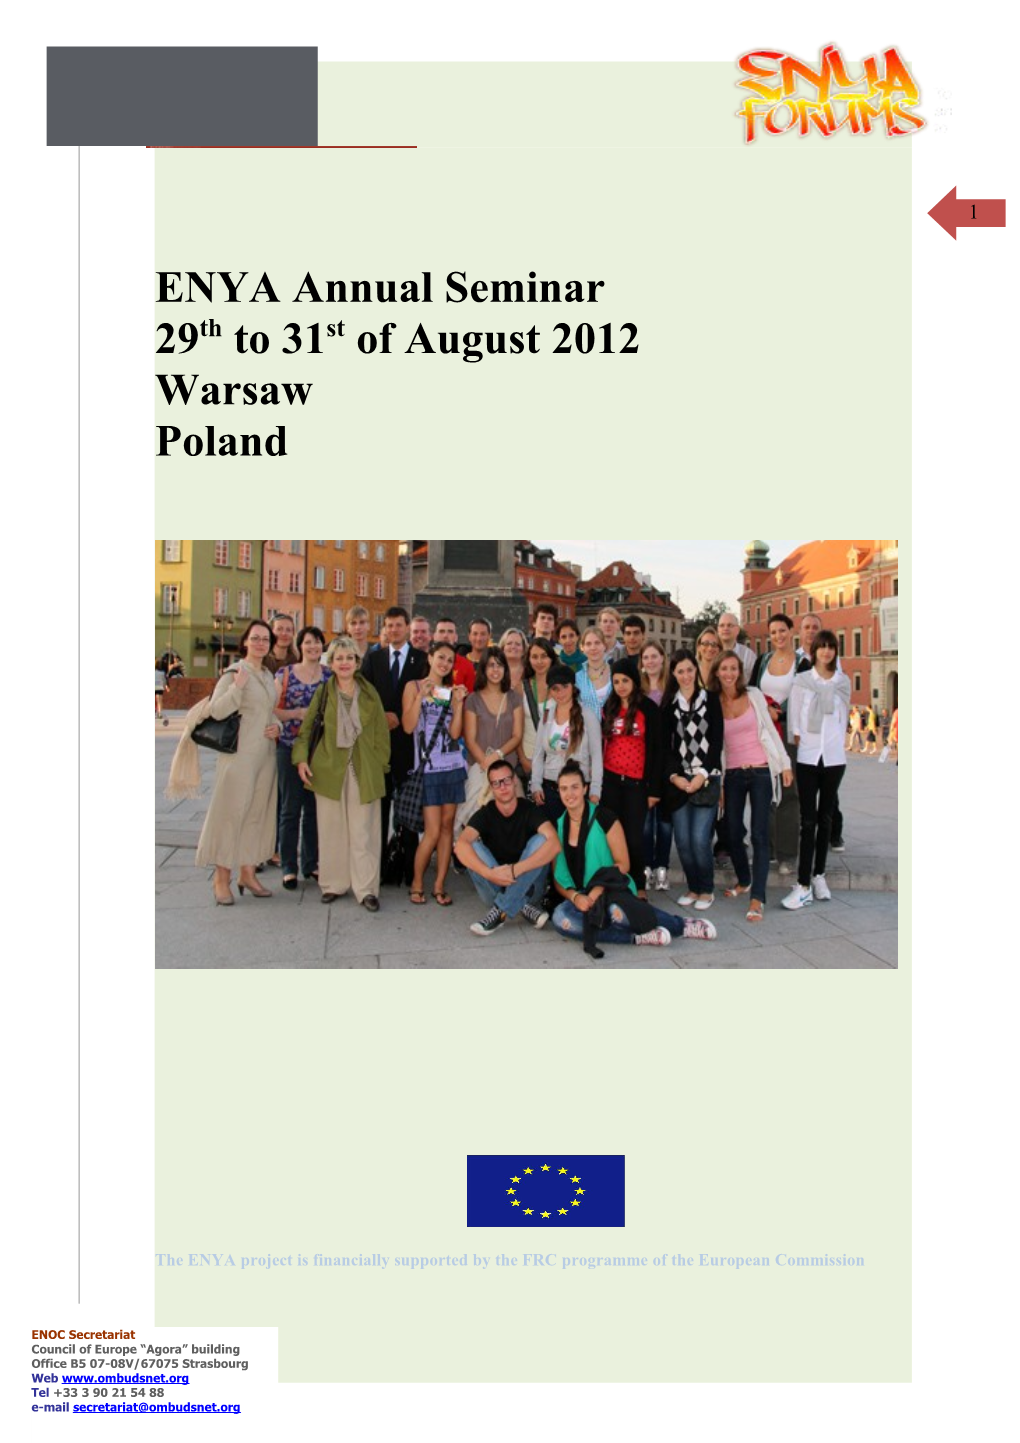 The ENYA Project Is Financially Supported by the FRC Programme of the European Commission